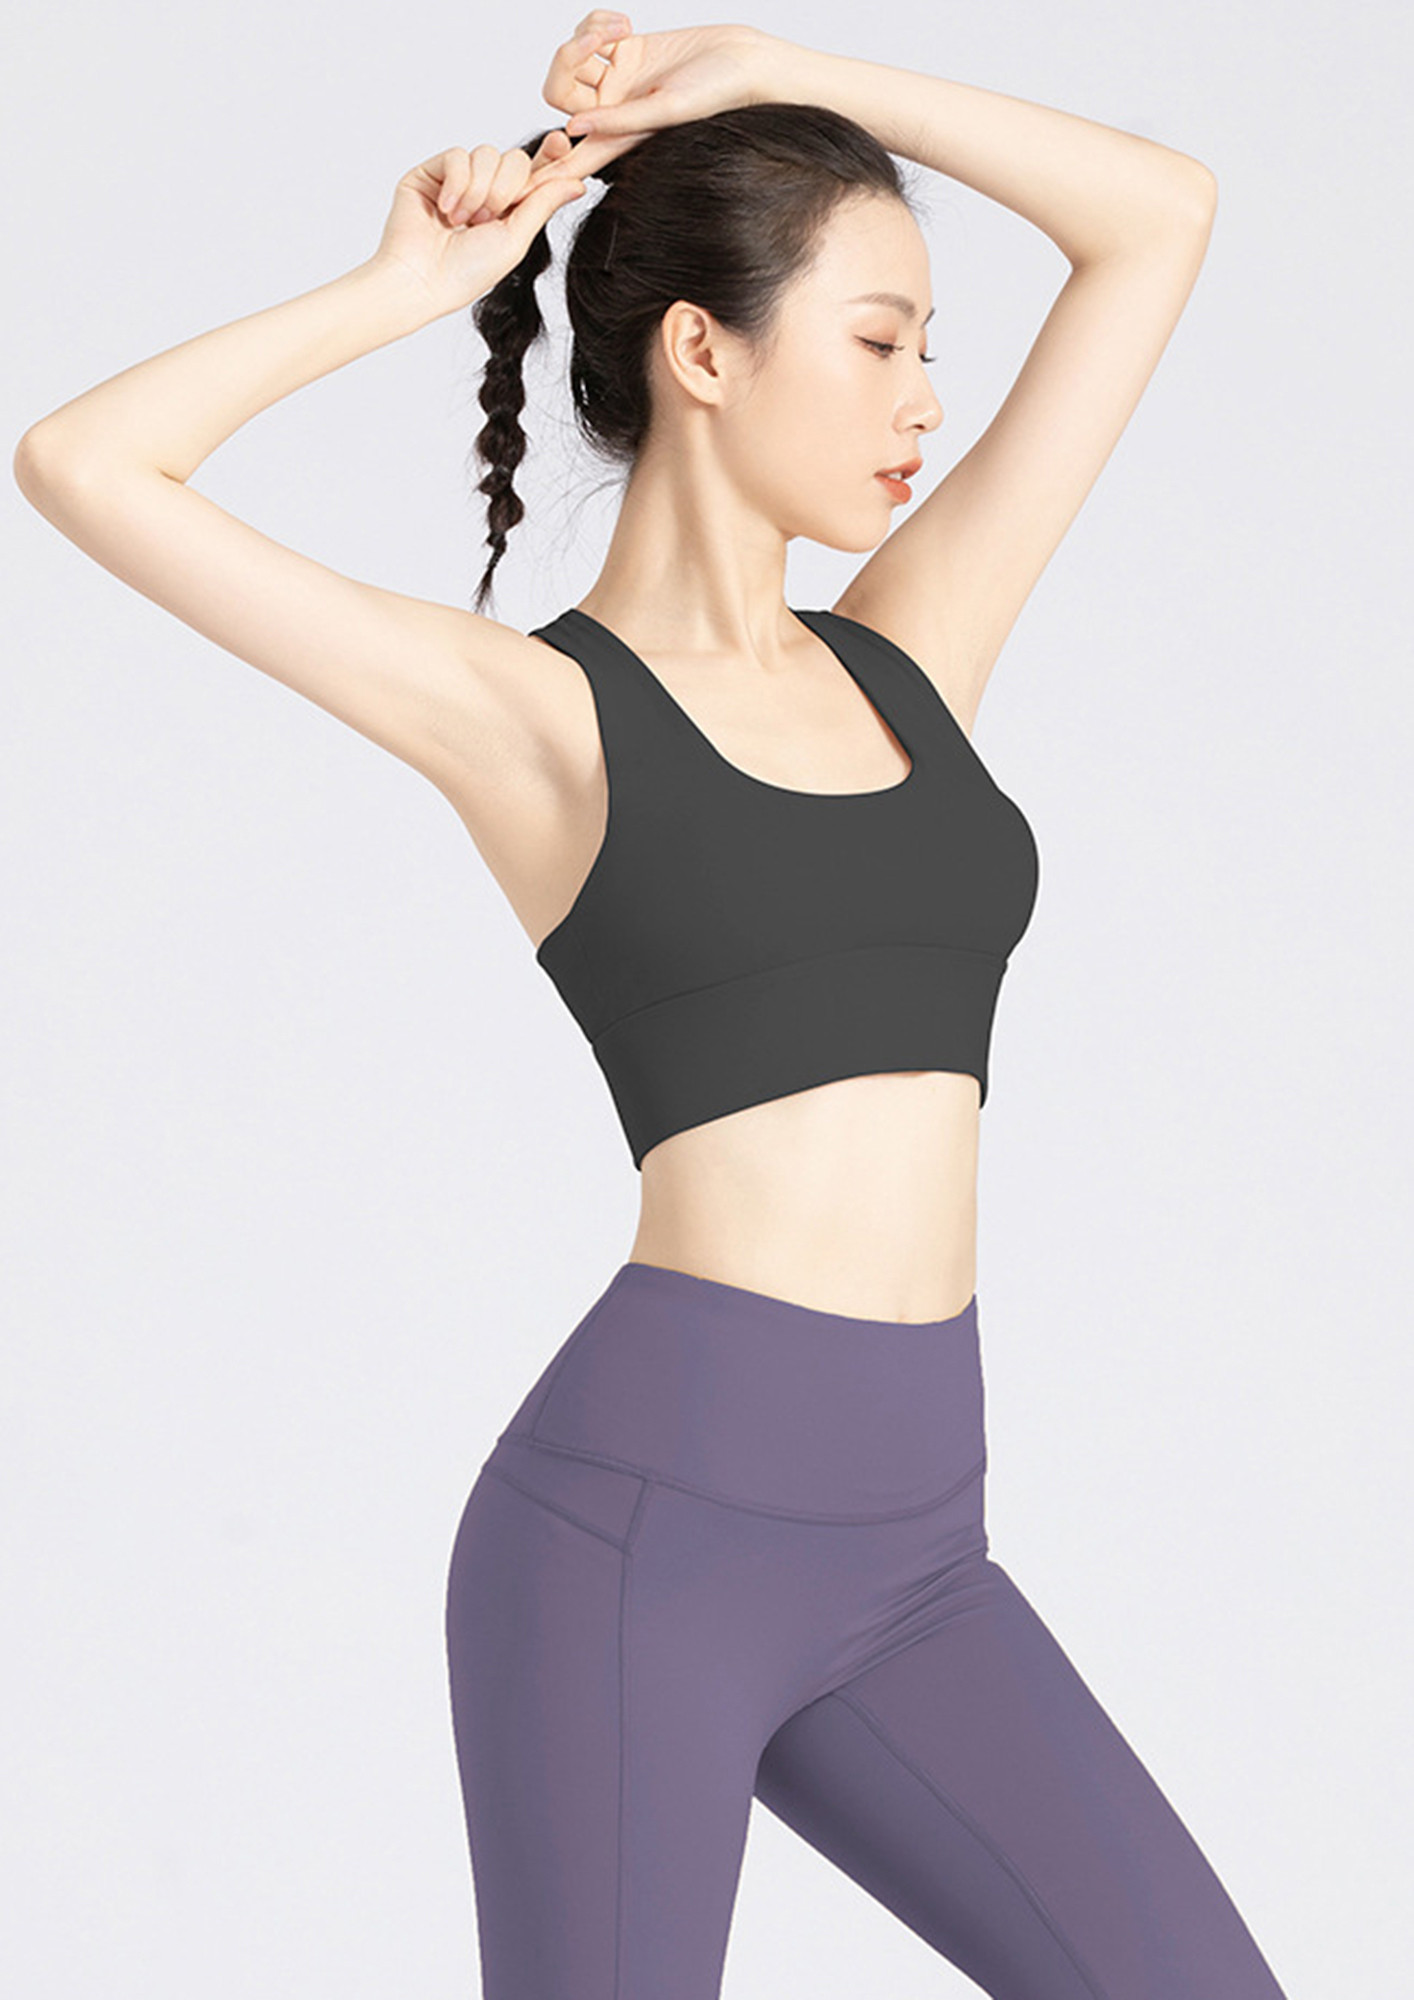 Buy THE COOL FIT BLACK SPORTS BRA for Women Online in India